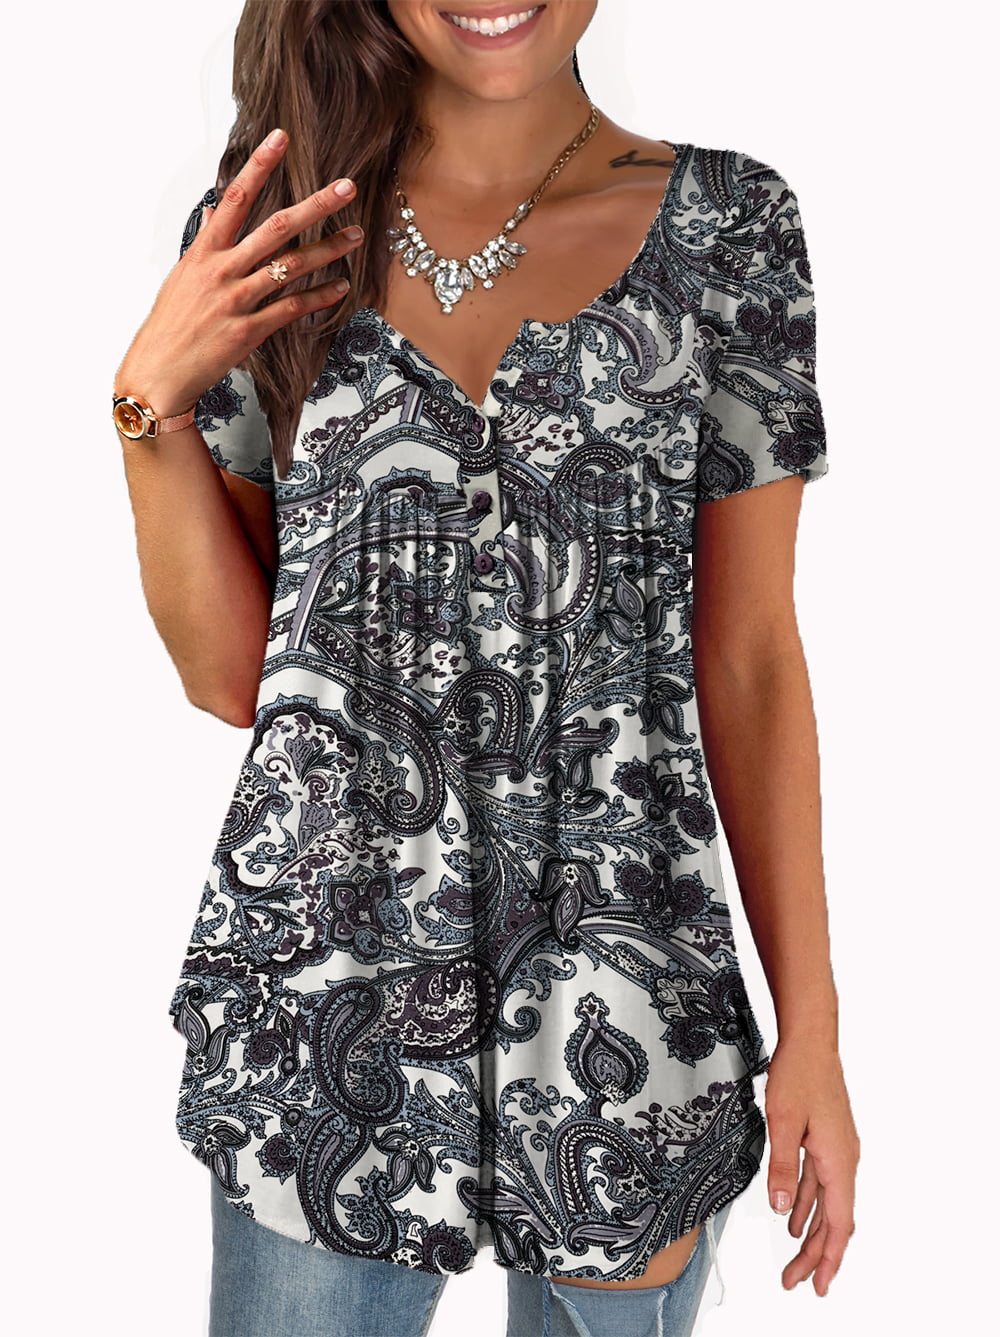 Total Mose Hen imod a.Jesdani Womens Plus Size Tunic Tops short Sleeve Casual Floral Henley  Shirts M-4X - Walmart.com